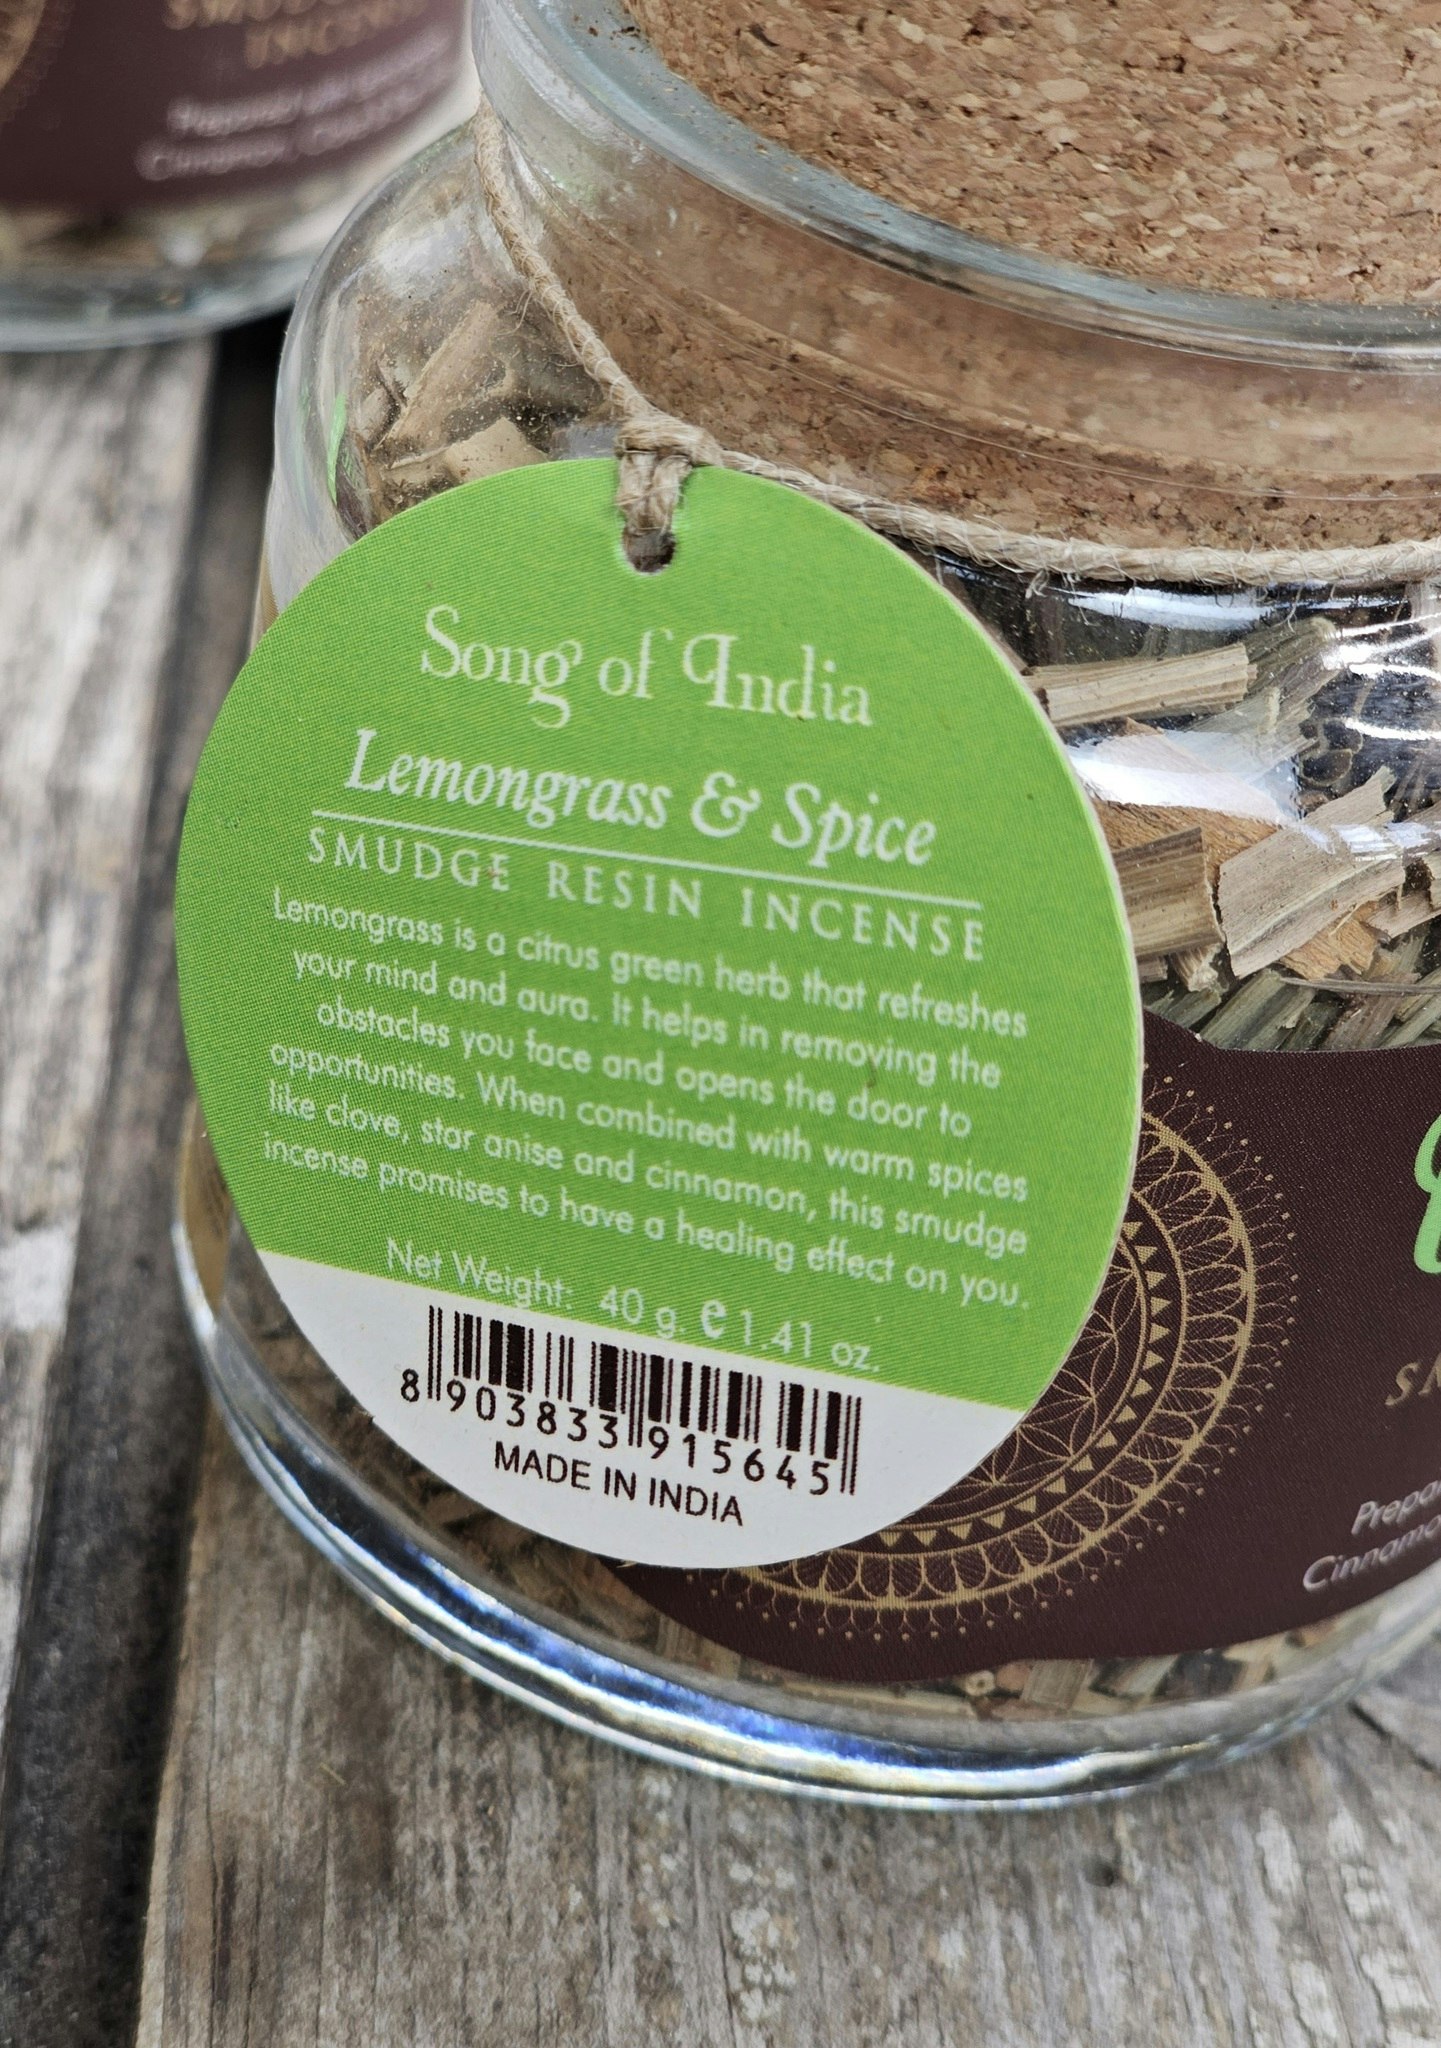 Song Of India - Lemongrass & spice, smudge resin